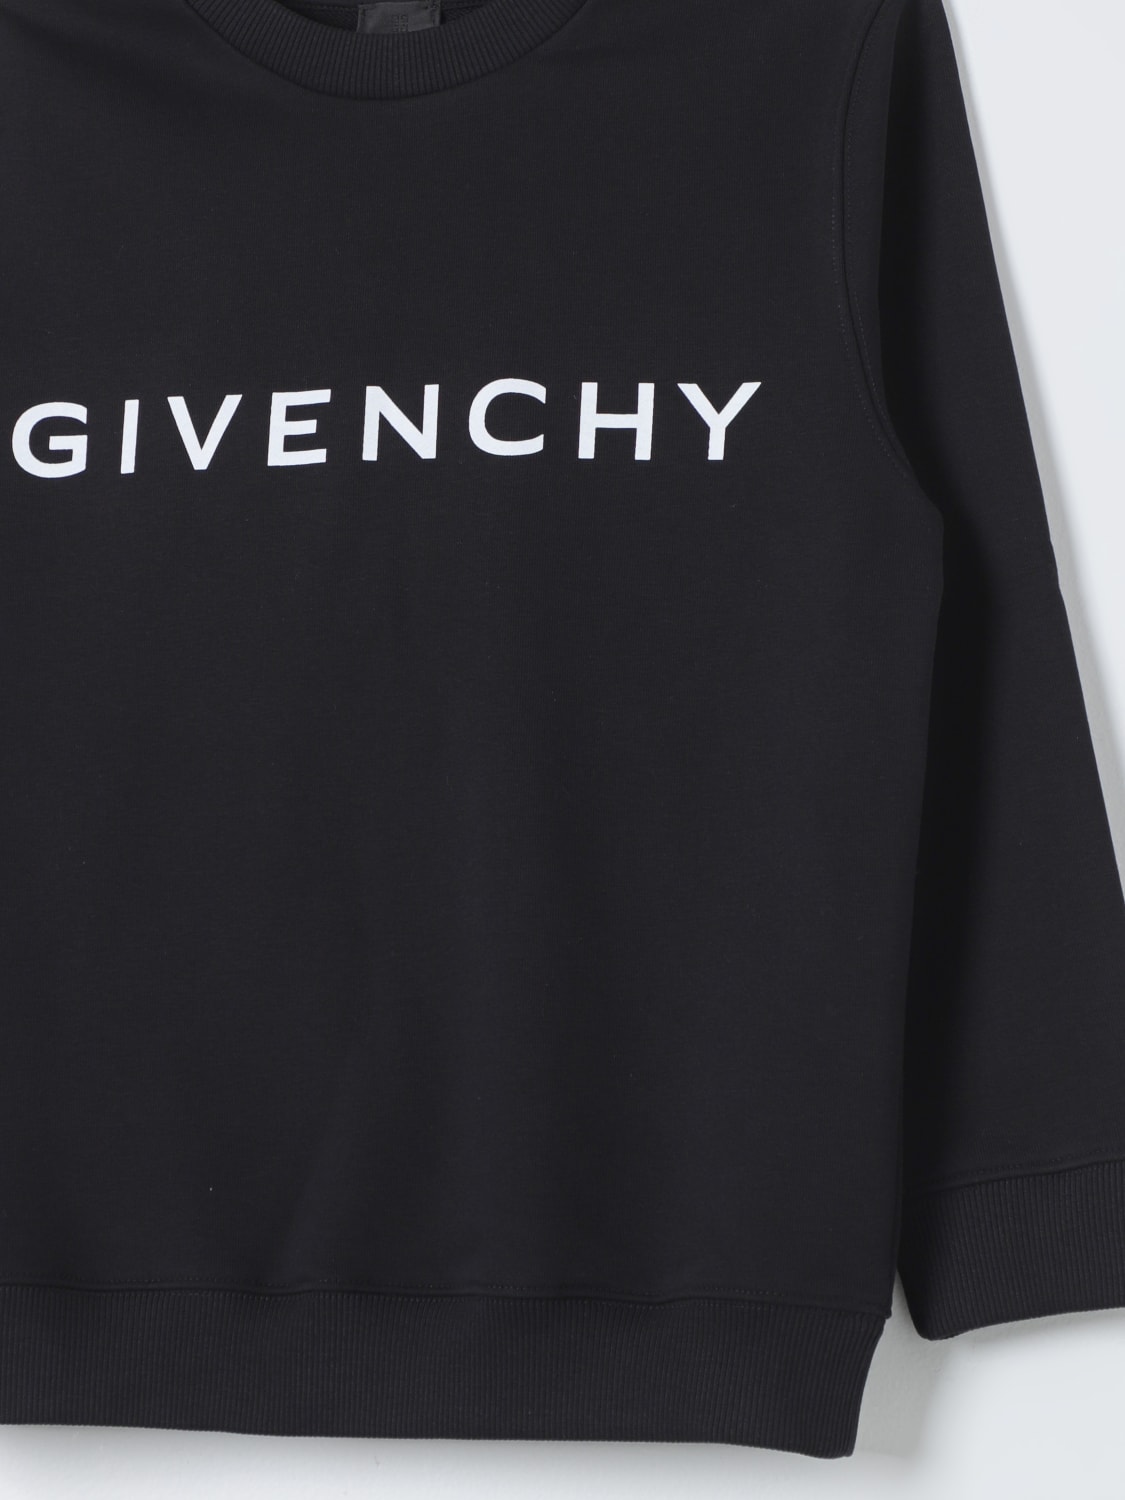 GIVENCHY: Sweater kids - Black  GIVENCHY sweater H30147 online at